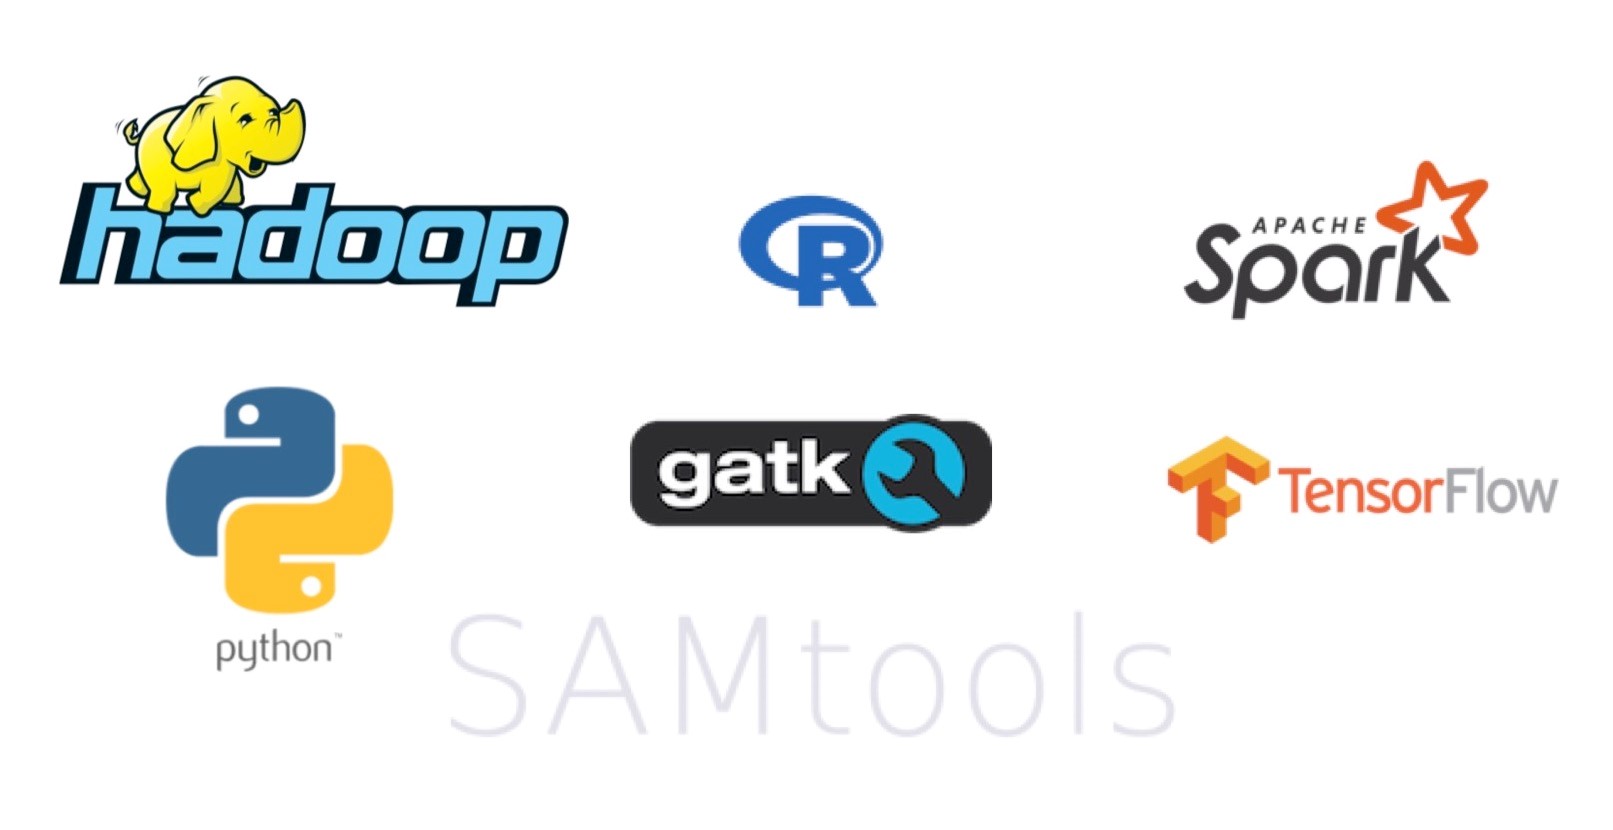 software products that are popularly used for data analysis, bioinformatics, big data analytics and machine learning